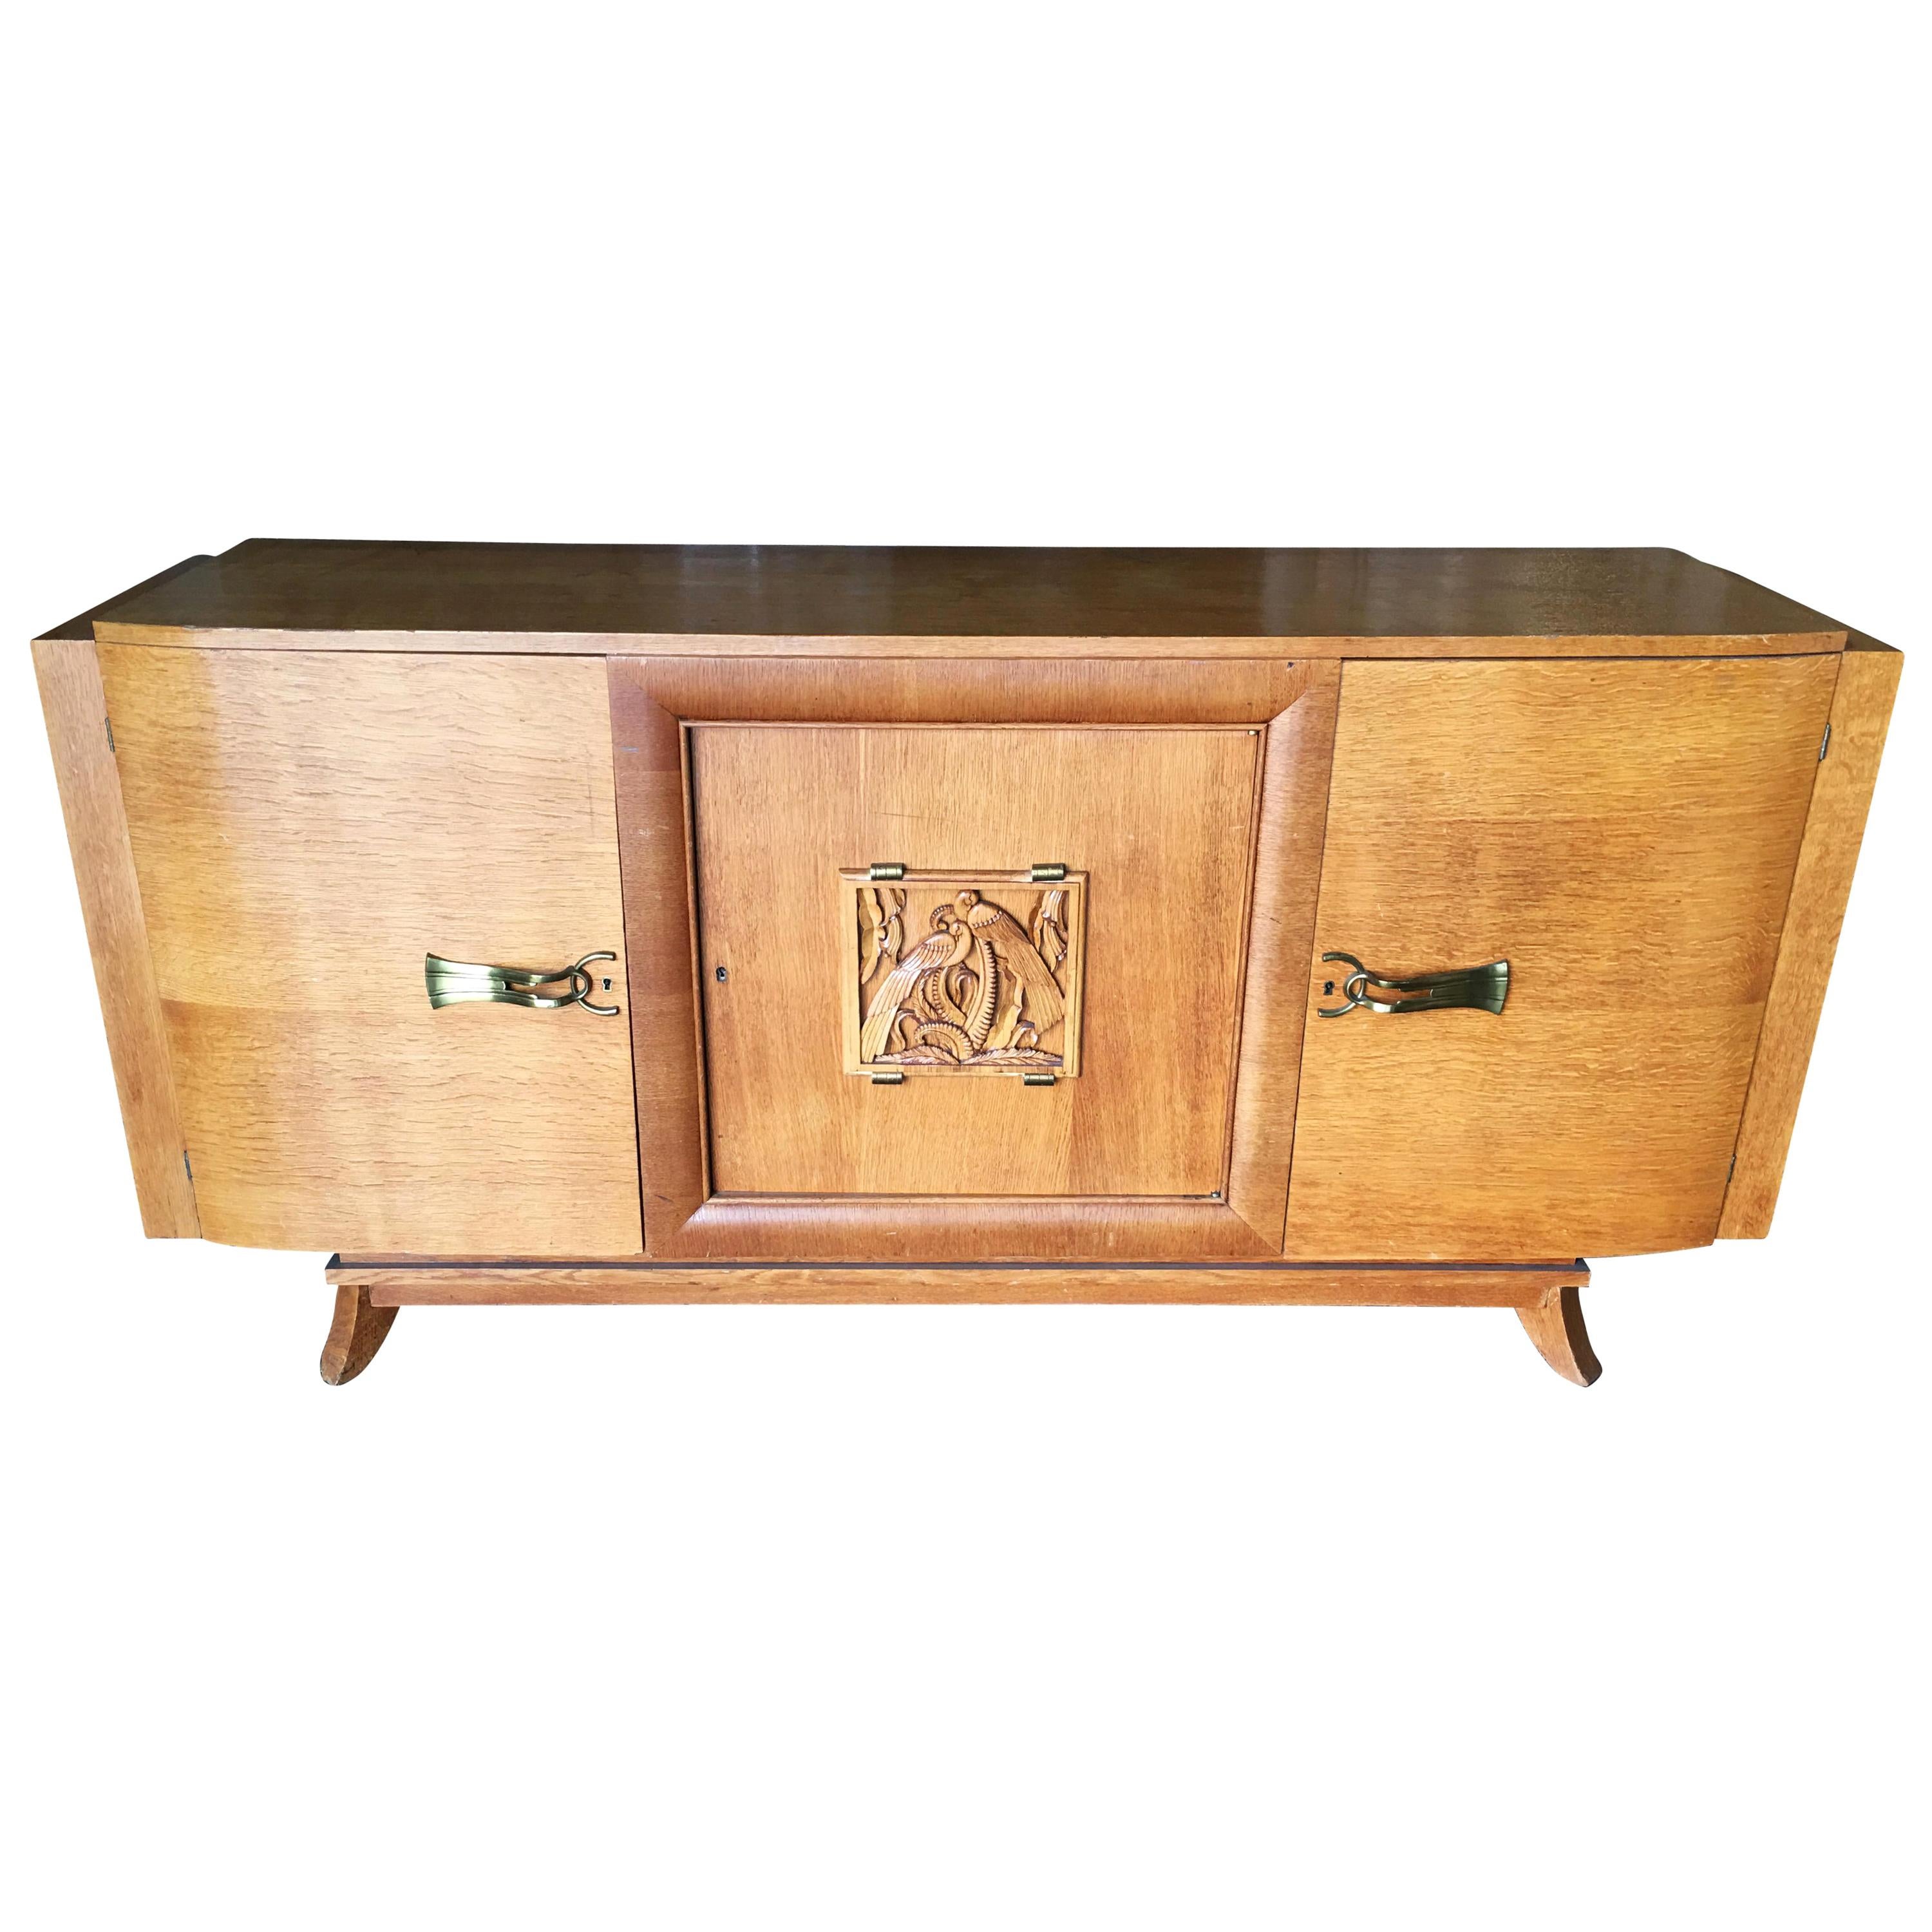 James Mont Style Sideboard with Carved Art Sculpture